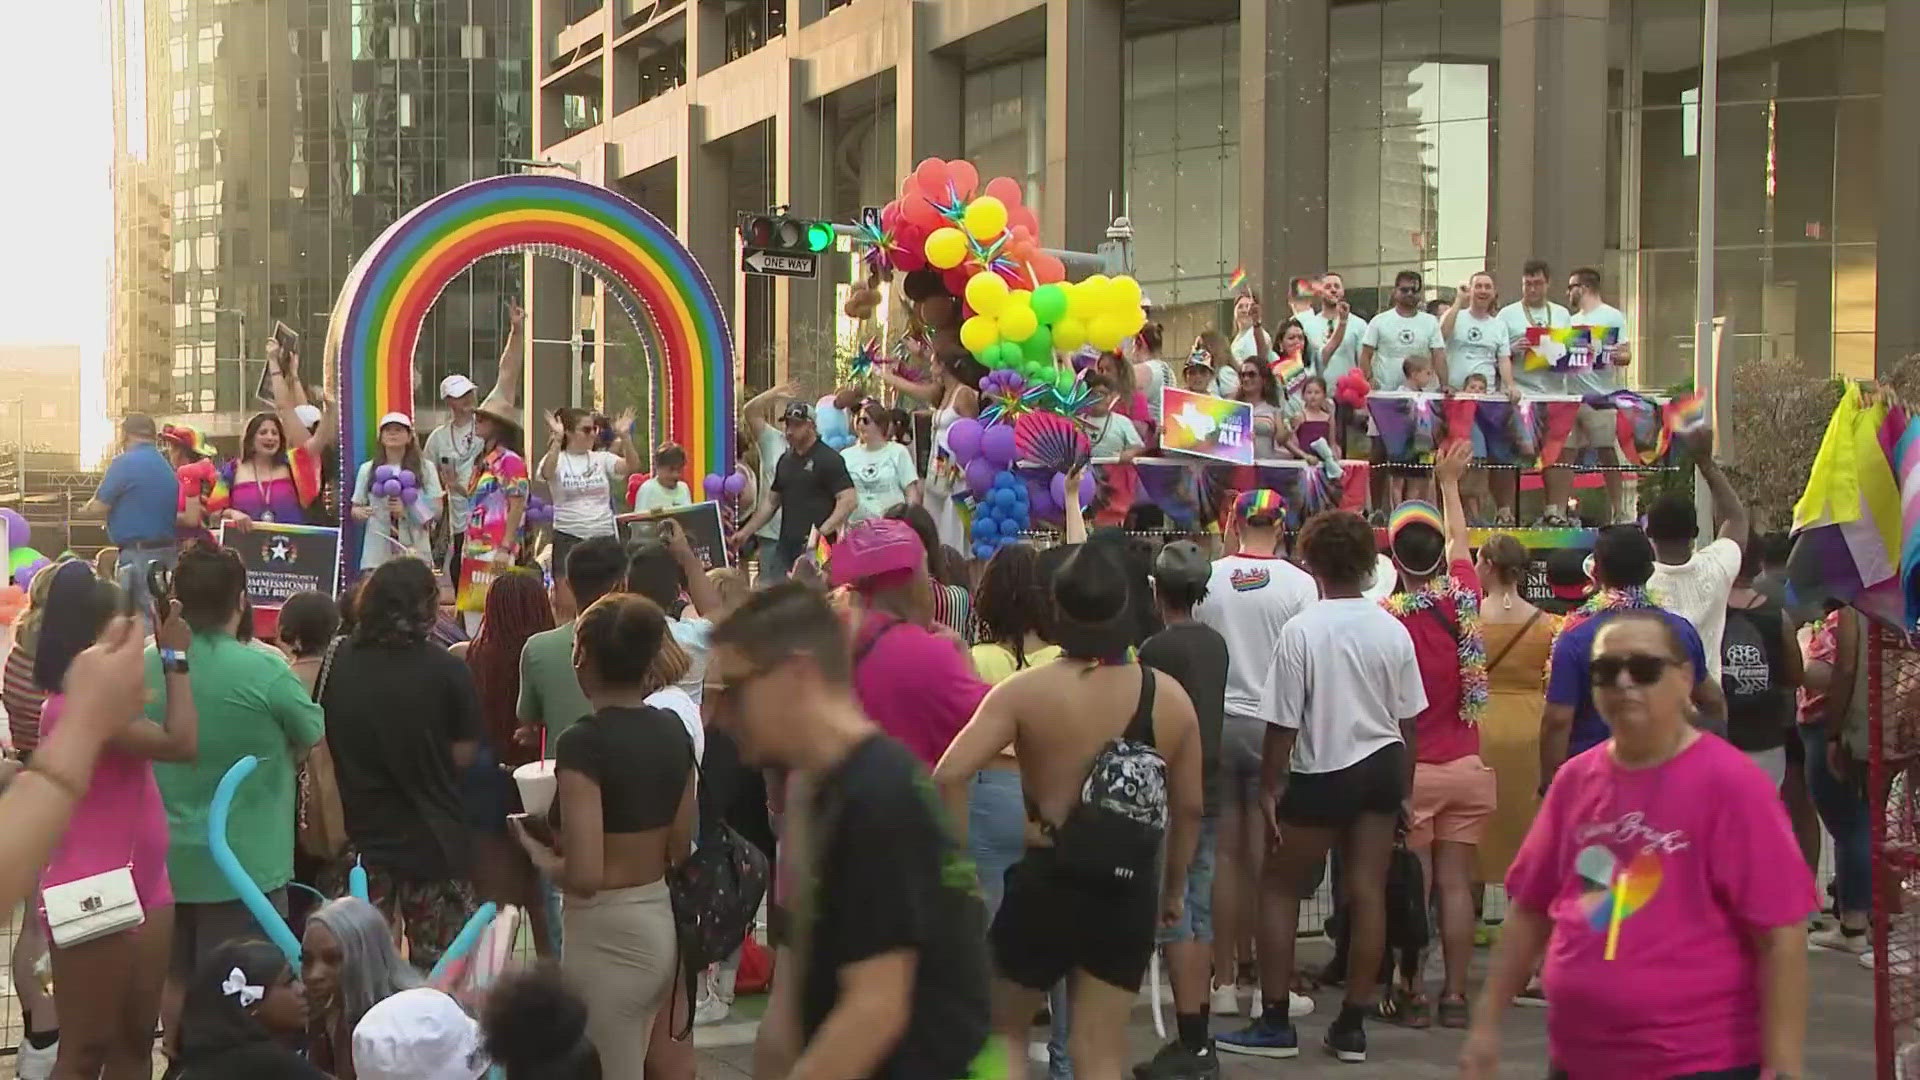 The event organized by Pride Houston 365 is one of the largest and oldest pride celebrations in Texas.